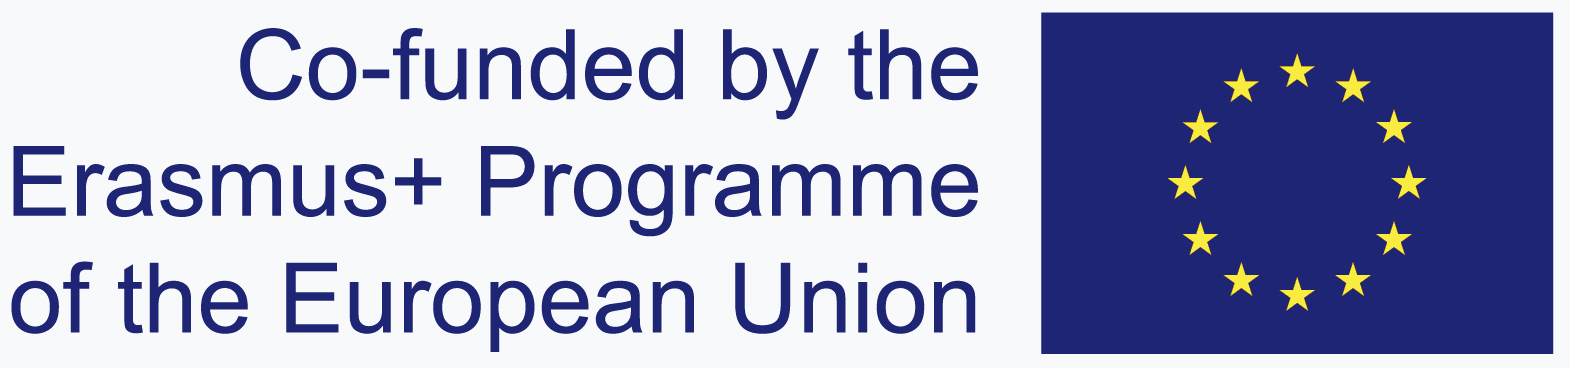 Erasmus+ logo with text:
"Co-funded by the Erasmus+ Programme of the European Union"